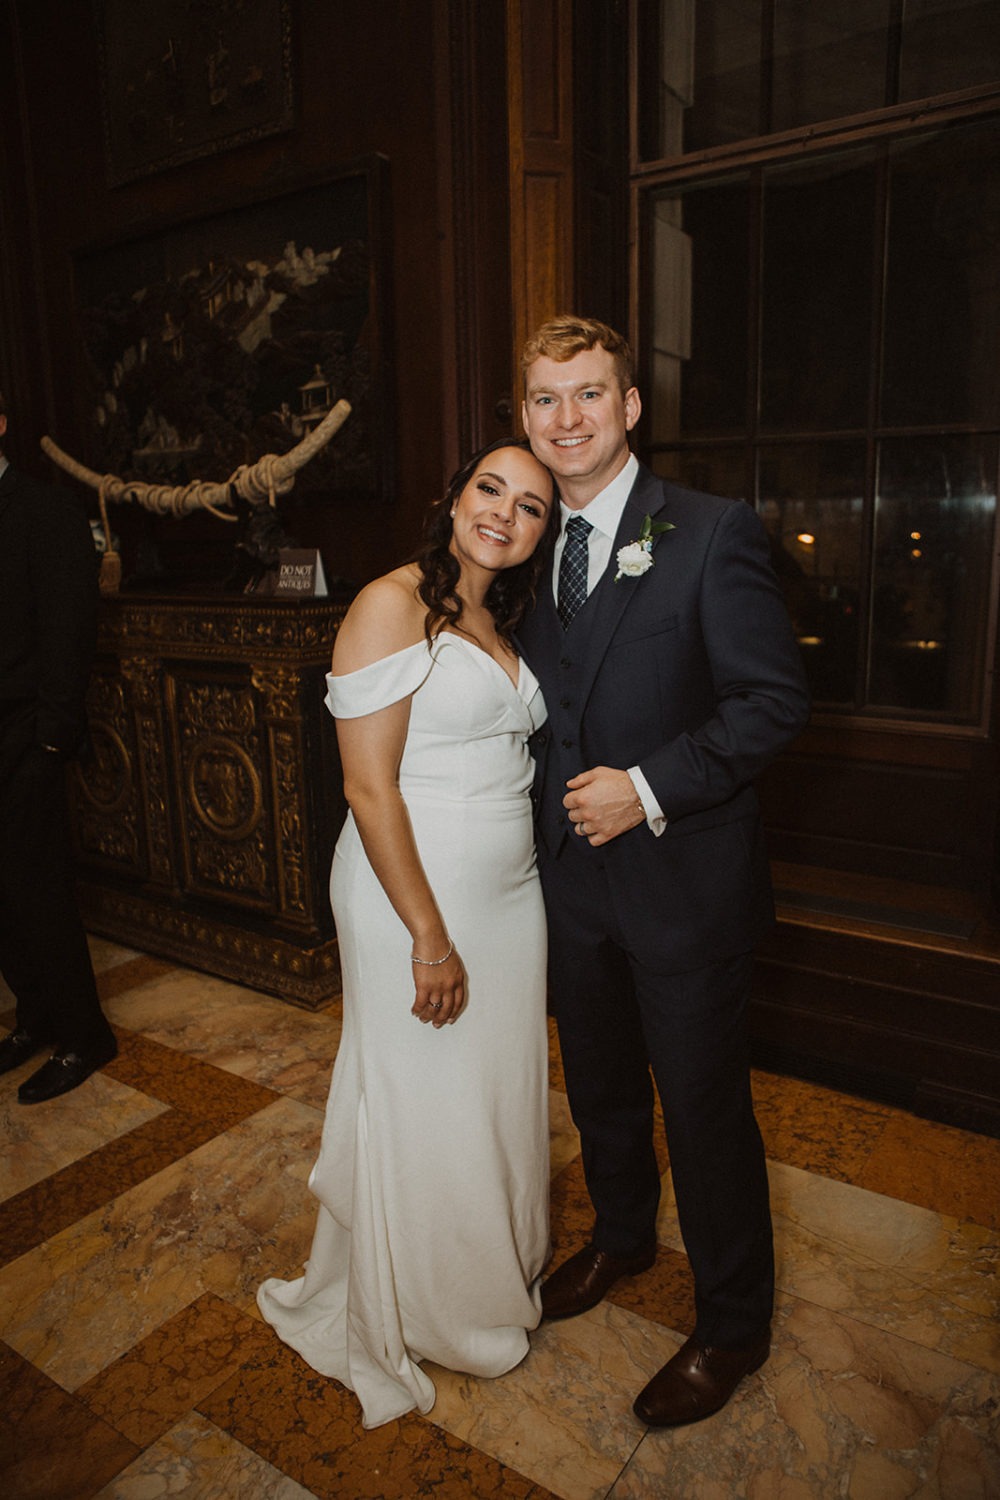 couple embraces in hallway at mansion wedding venue